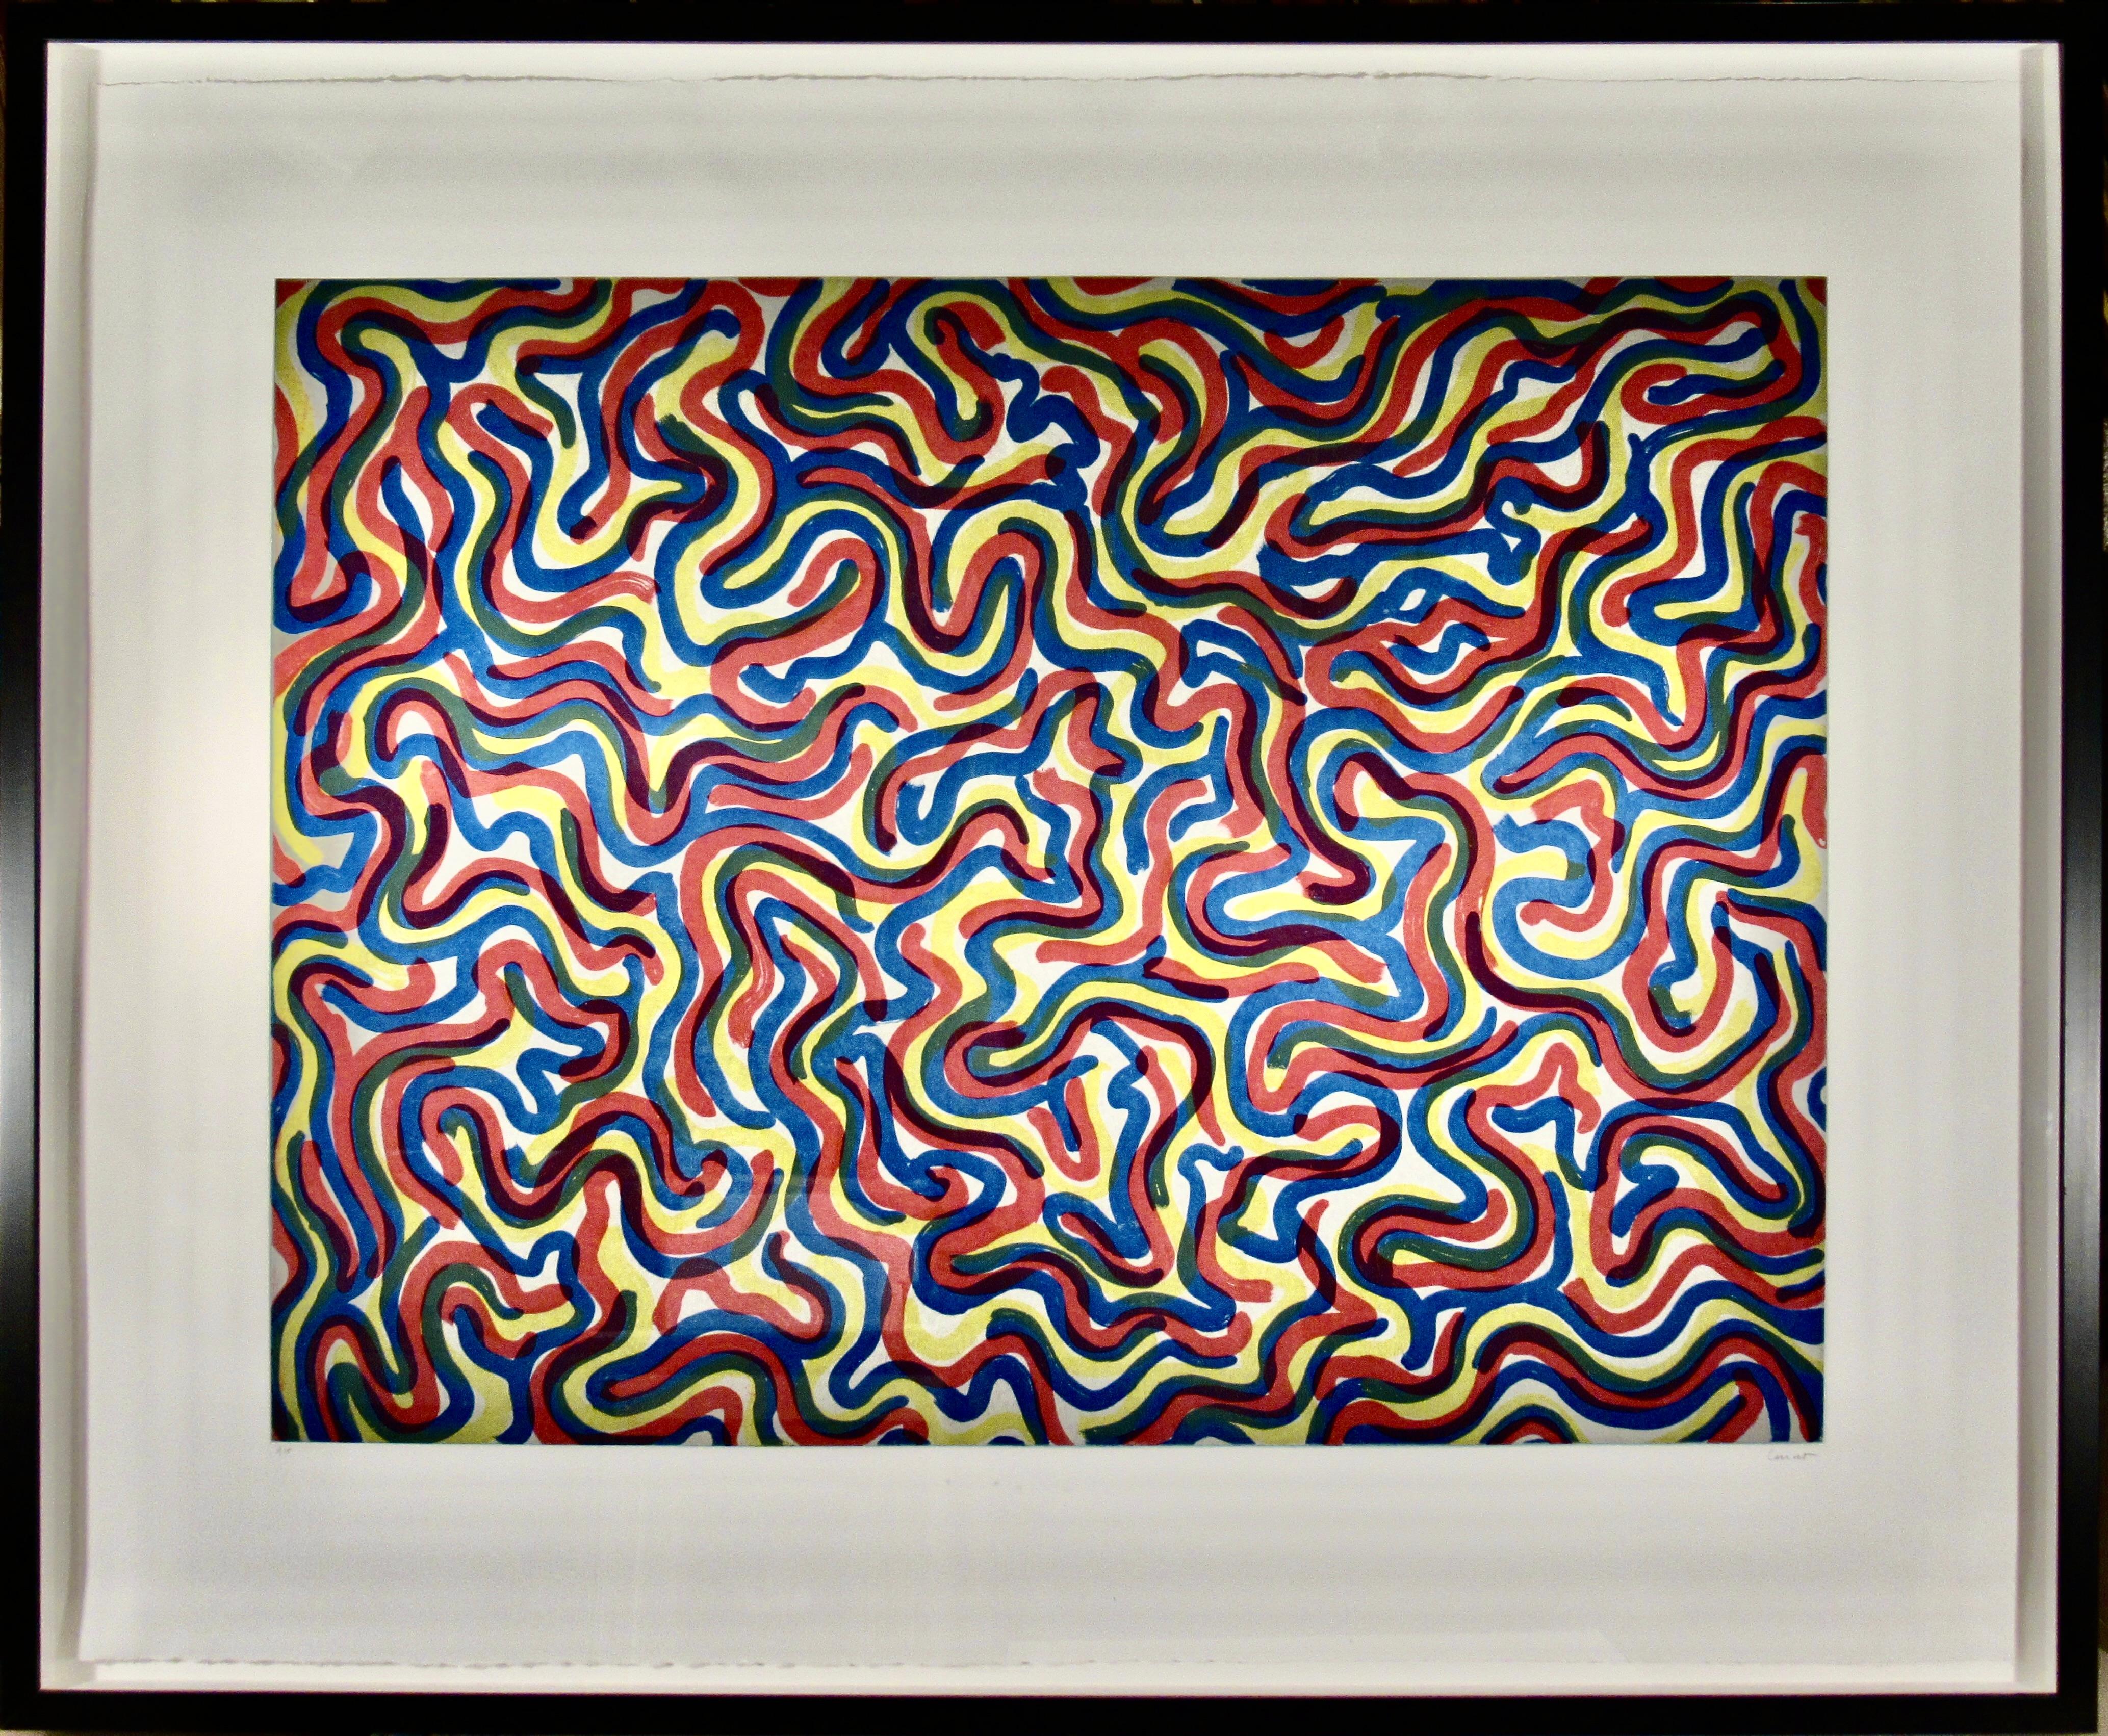 Sol LeWitt Abstract Print - "Curvy Brushstrokes" Large etching with aquatint, framed